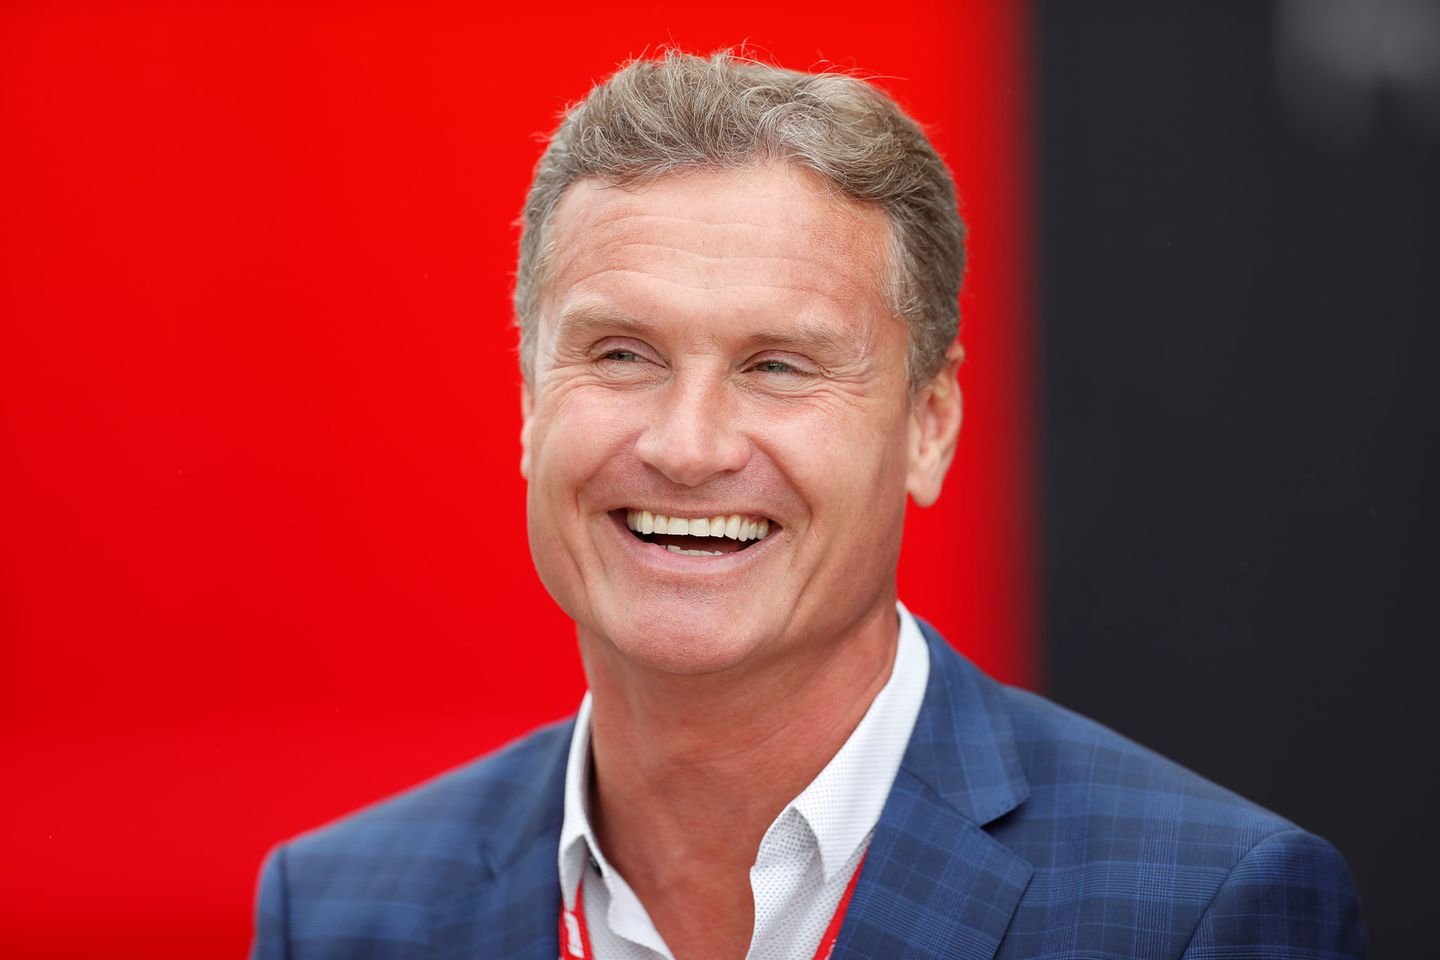  Happy Birthday to David Coulthard who turns 50 today! 